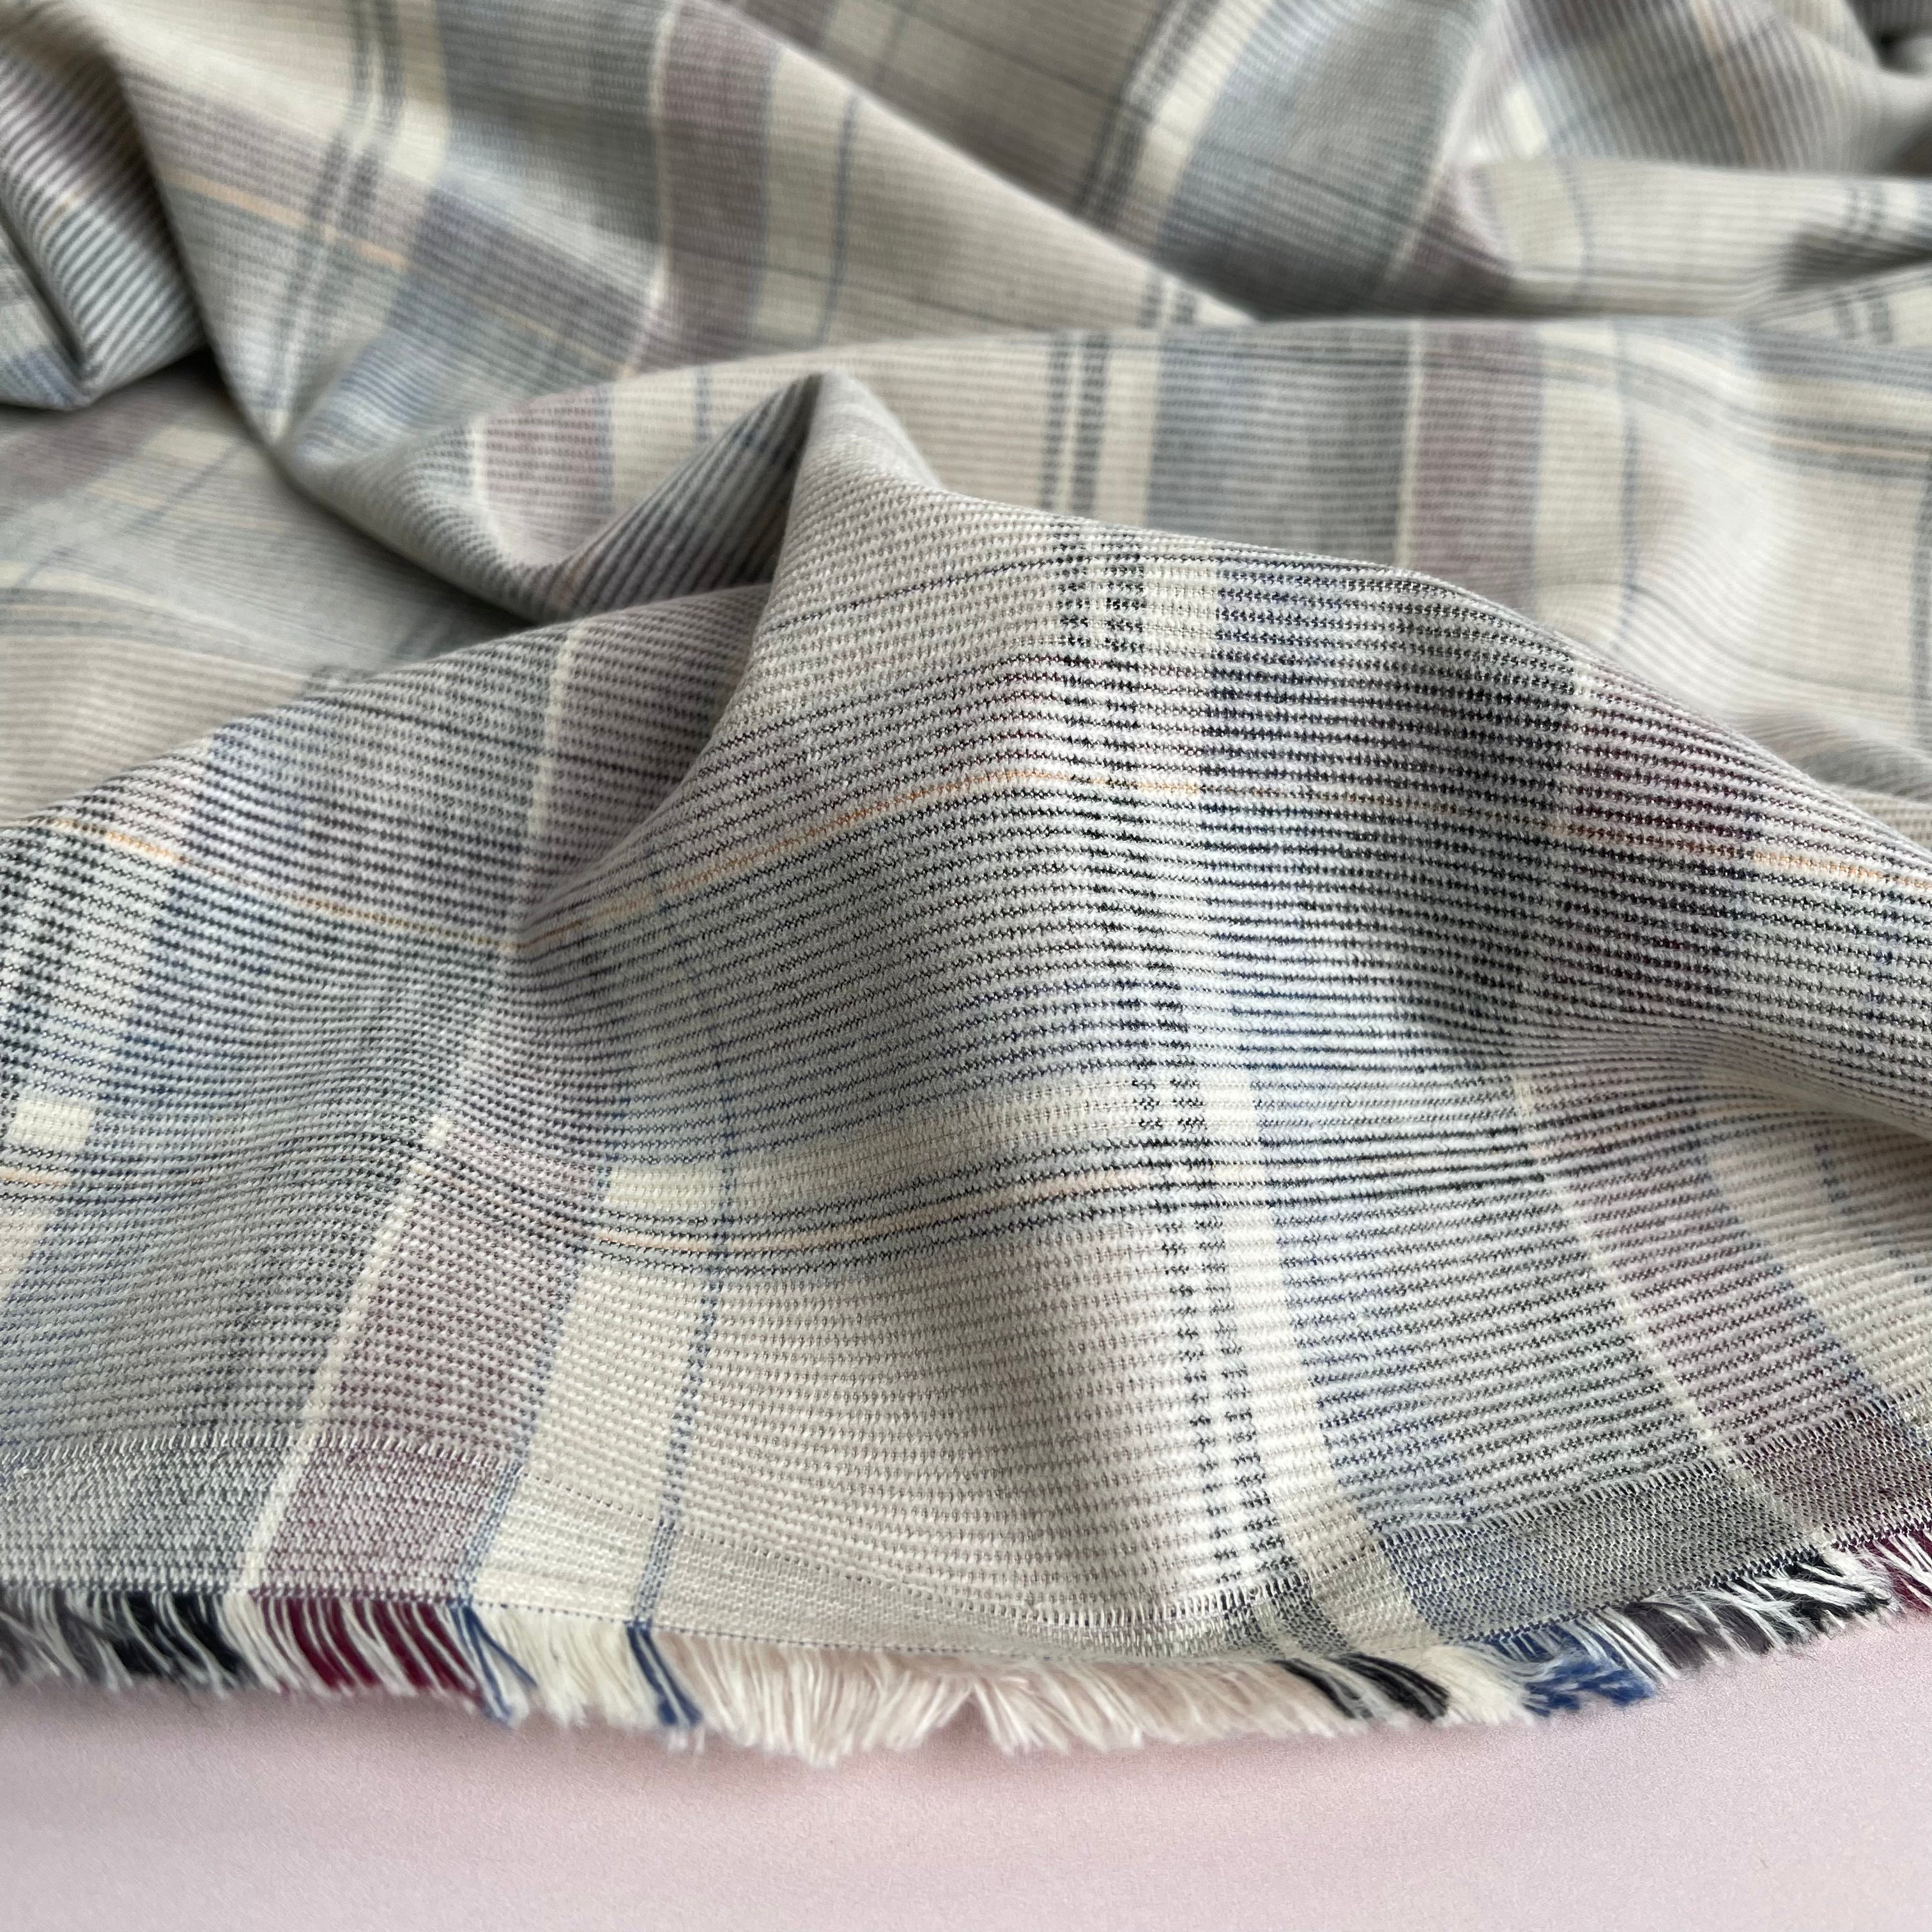 REMNANT 1.15 Metres - Yarn Dyed Checked Cotton Needlecord Fabric in Beige